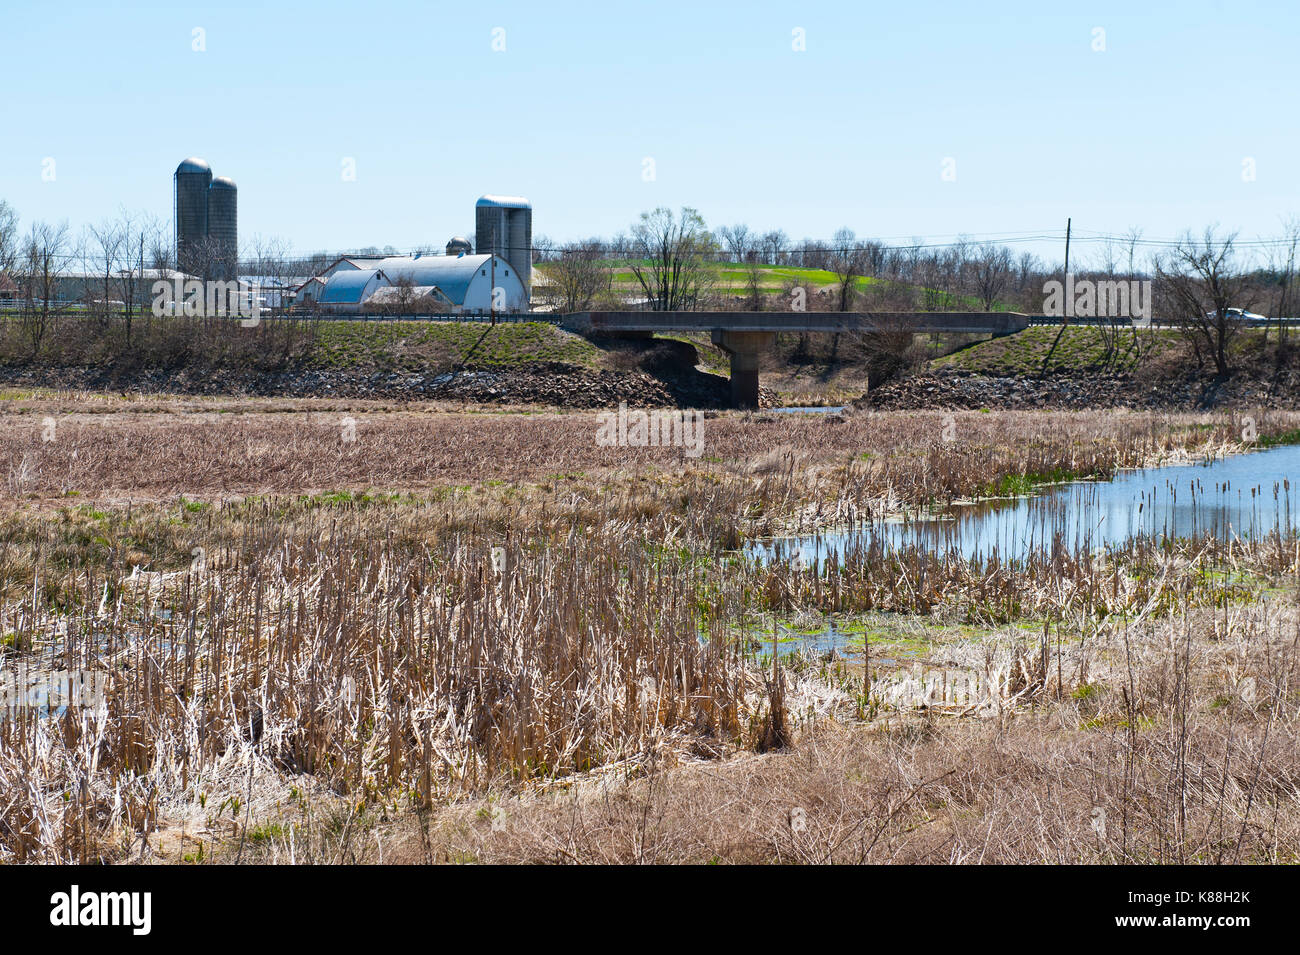 VIEW OF DRY LAKE BED AND BRIDGE AT SPEEDWELL FORGE LAKE AFTER DRAINING DUE TO DAM DAMAGE, LITITZ PENNSYLVANIA Stock Photo